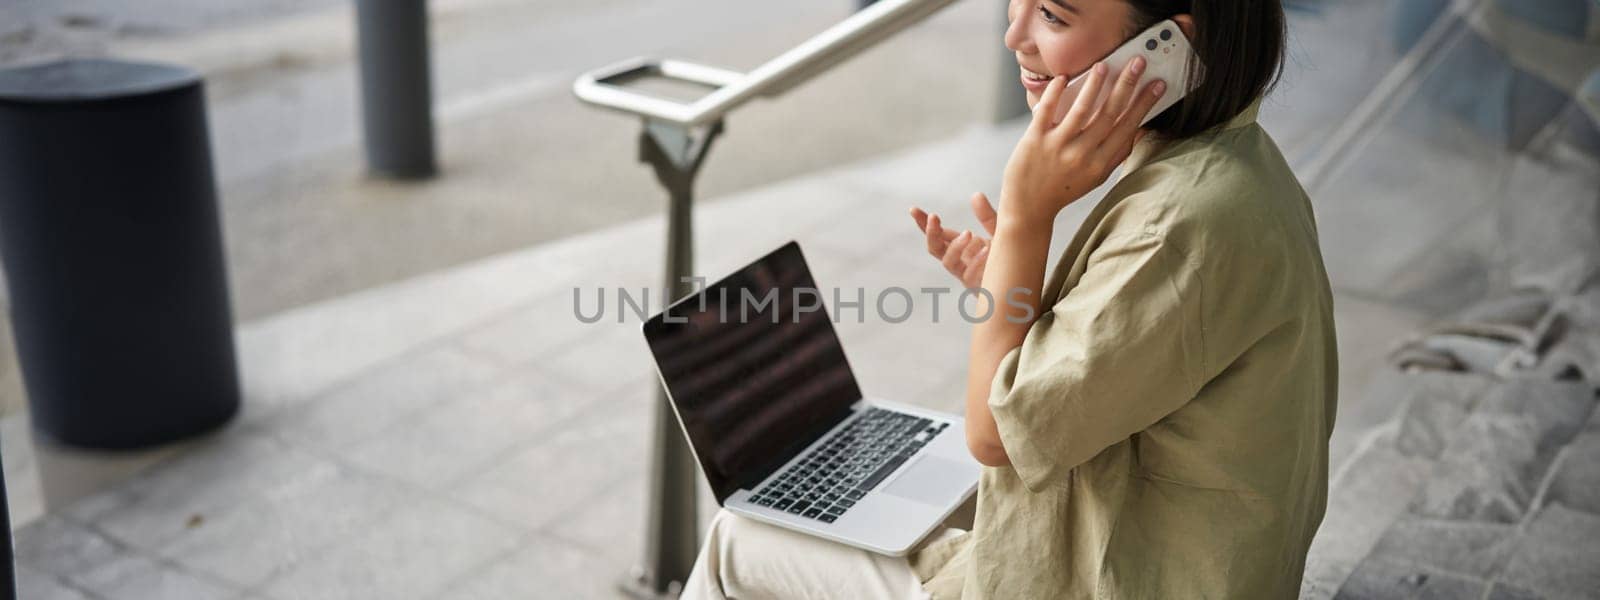 Smiling asian woman makes a phone call. Girl student using laptop and mobile phone, talking to someone on telephone.